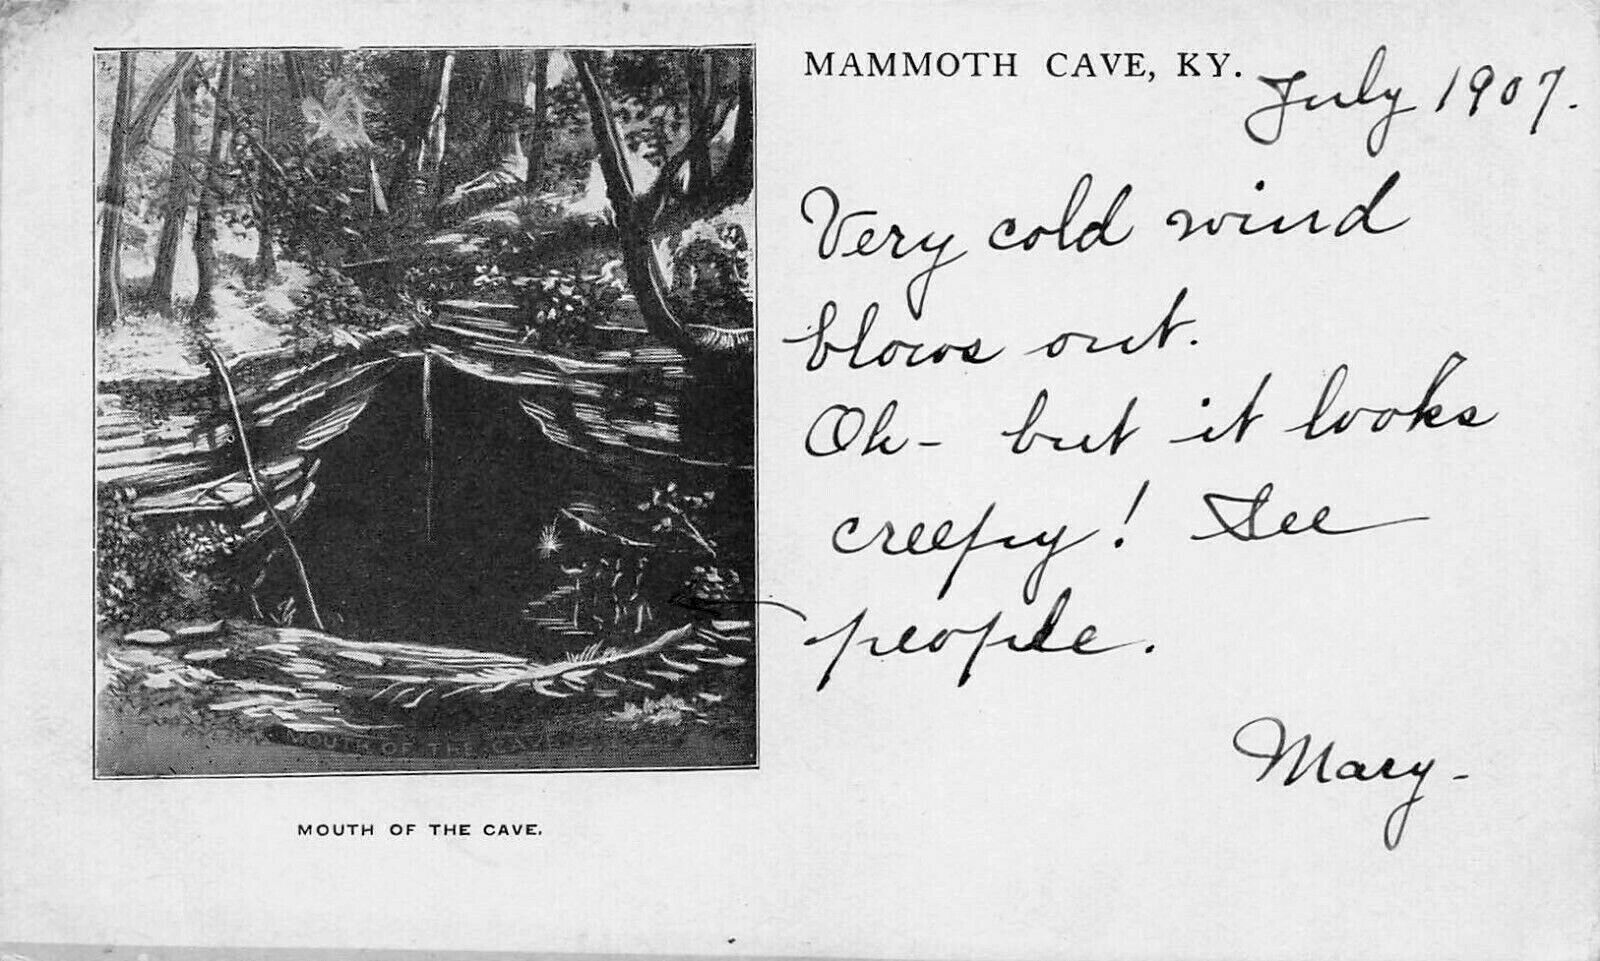 Mouth of the Cave, Mammoth Cave, Kentucky, July 1907 Postcard